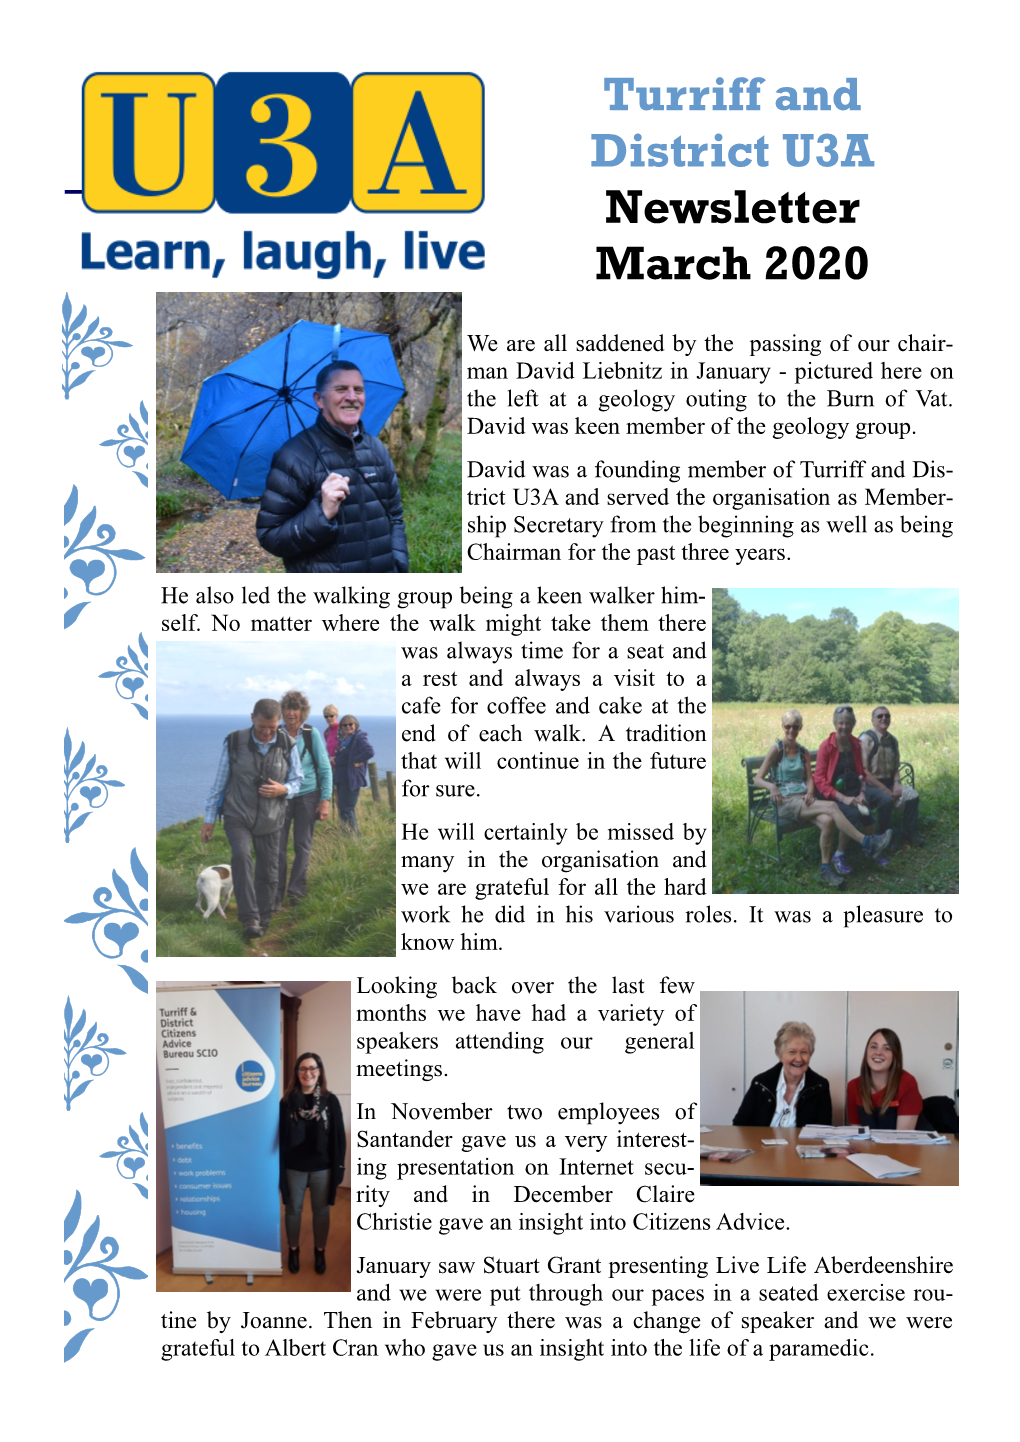 Turriff and District U3A Newsletter March 2020